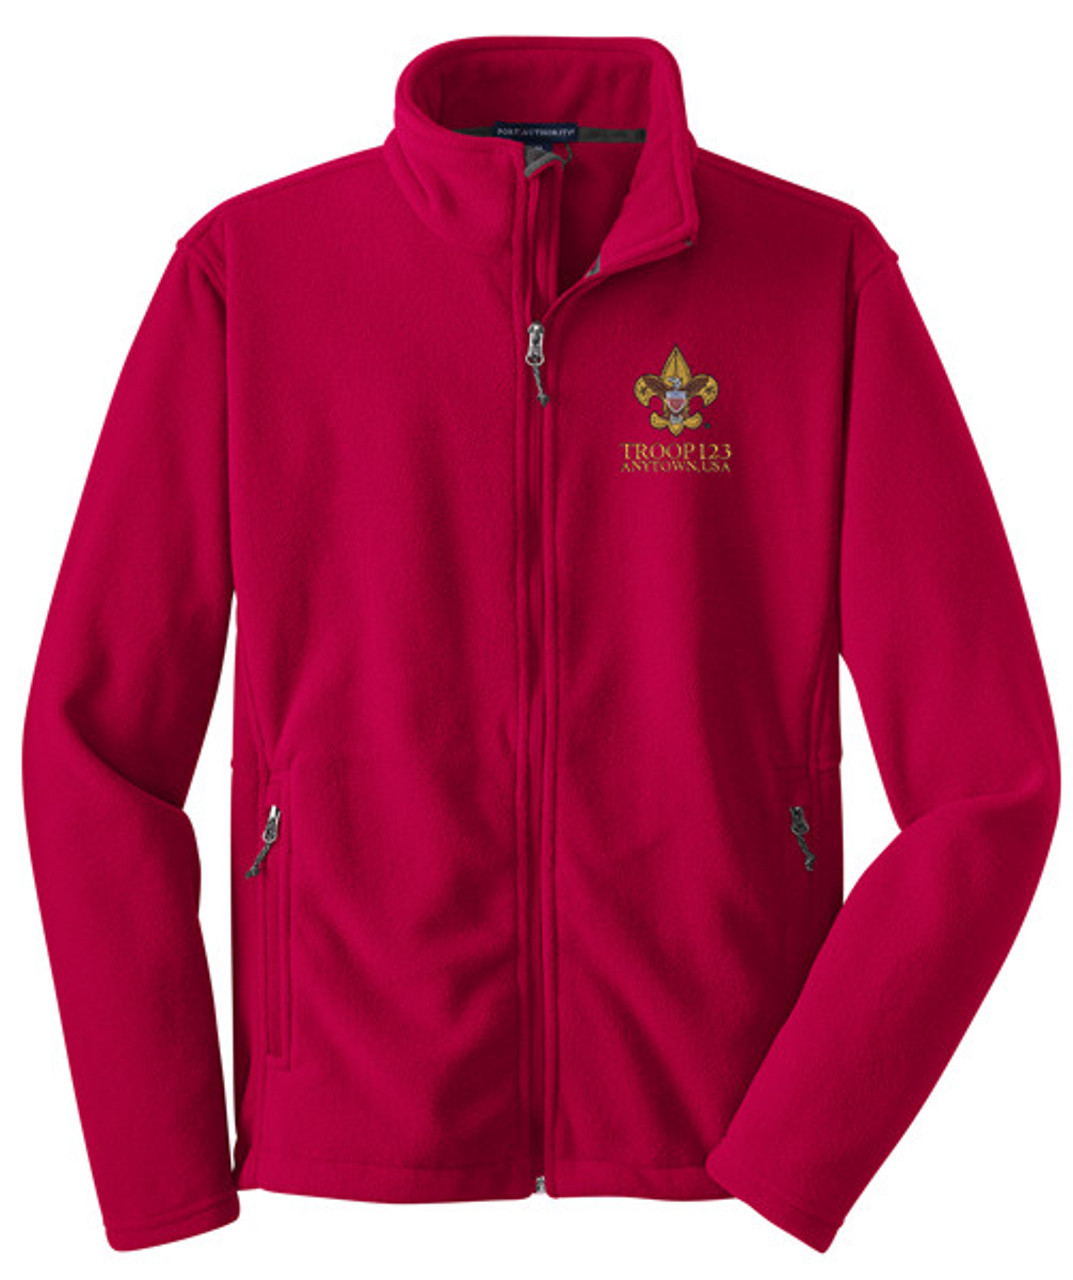 Value Fleece Jacket with Embroidered BSA Universal Logo